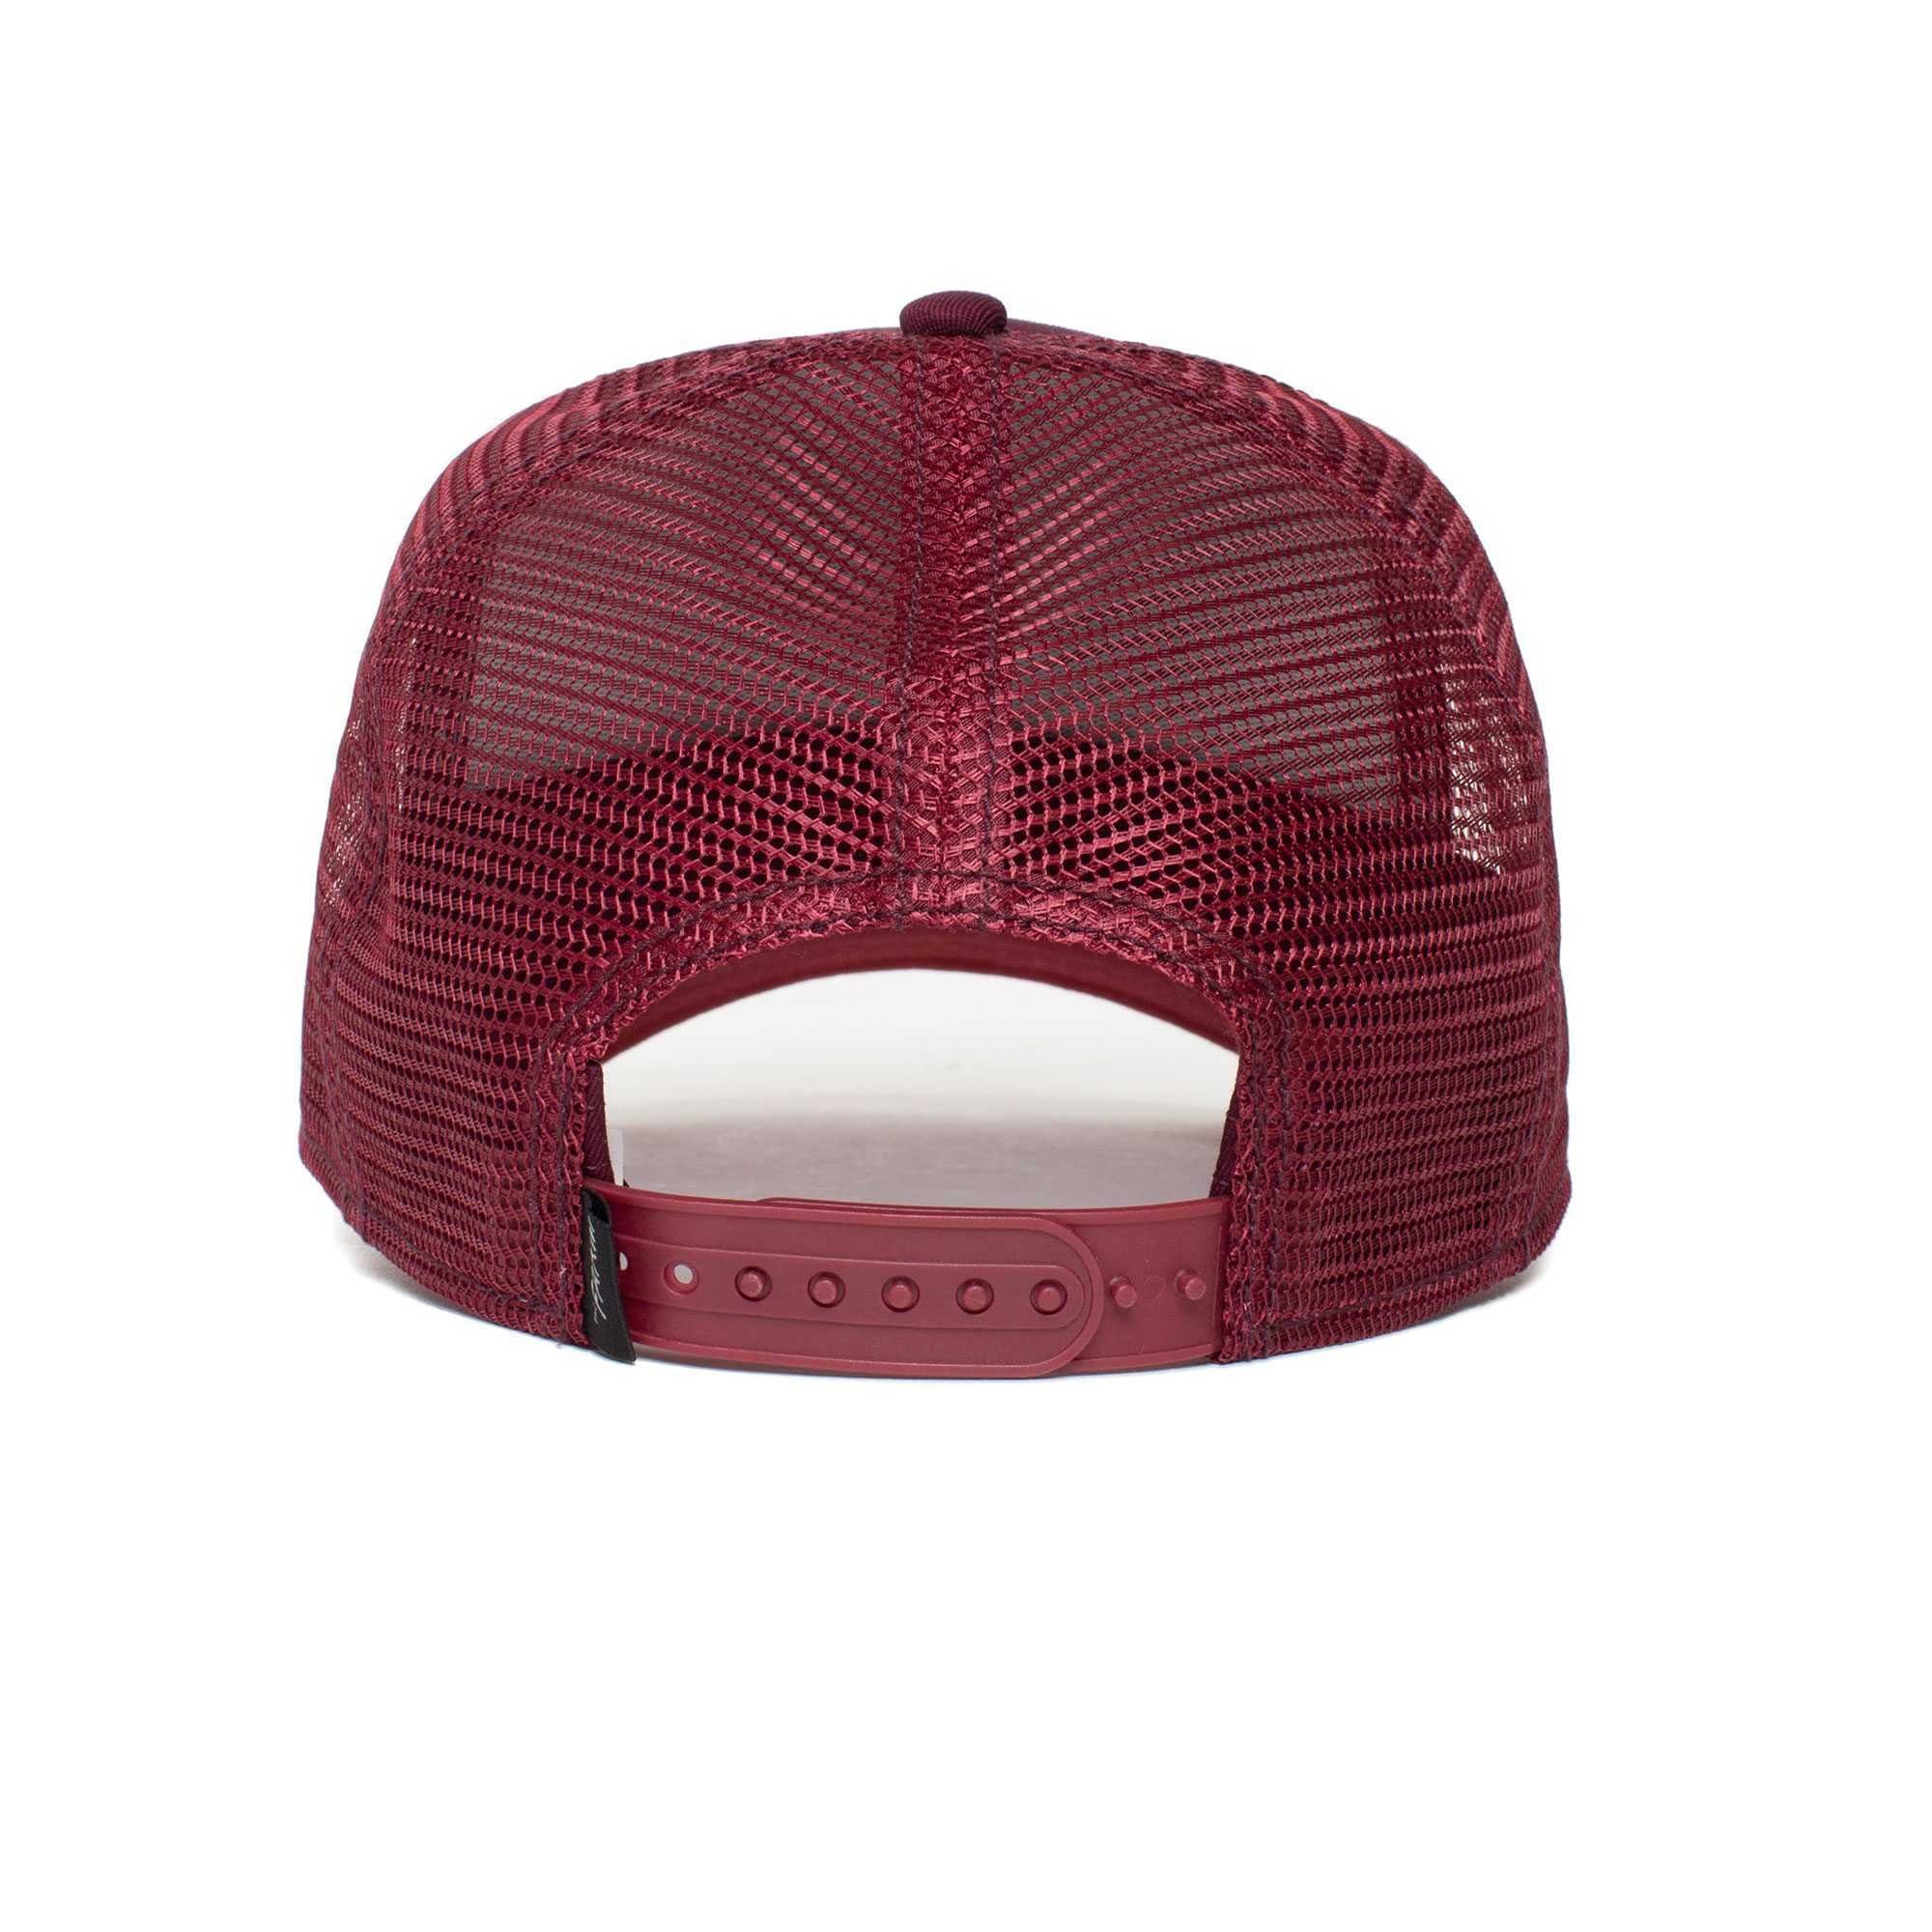 GOORIN Bros. Baseball Unisex Cap maroon Panther - Size One Frontpatch, The Trucker Cap Kappe